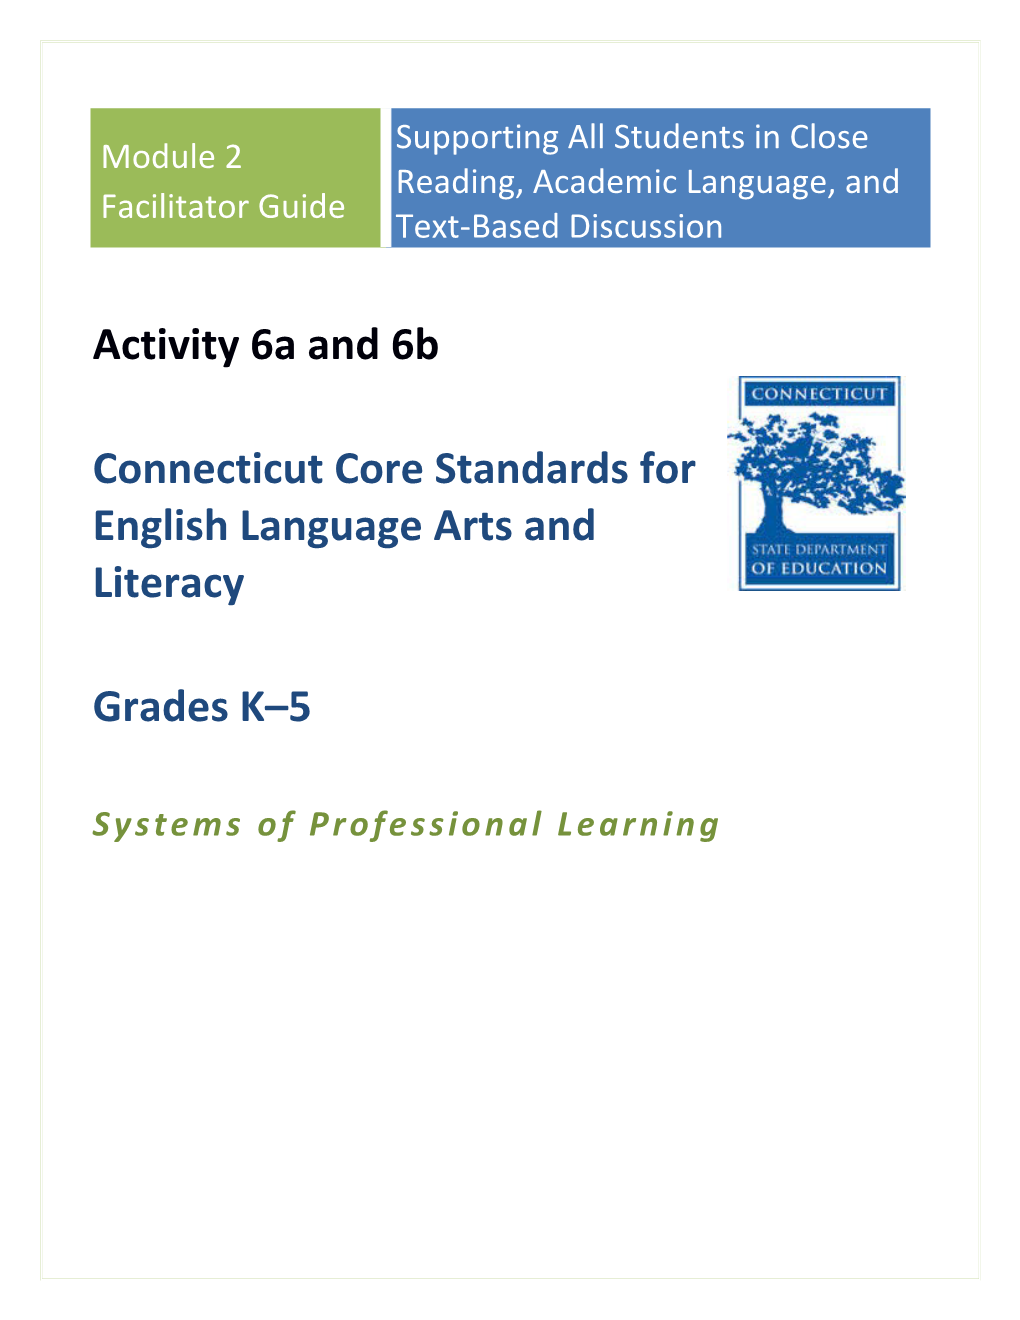 CT Systems of Professional Learning